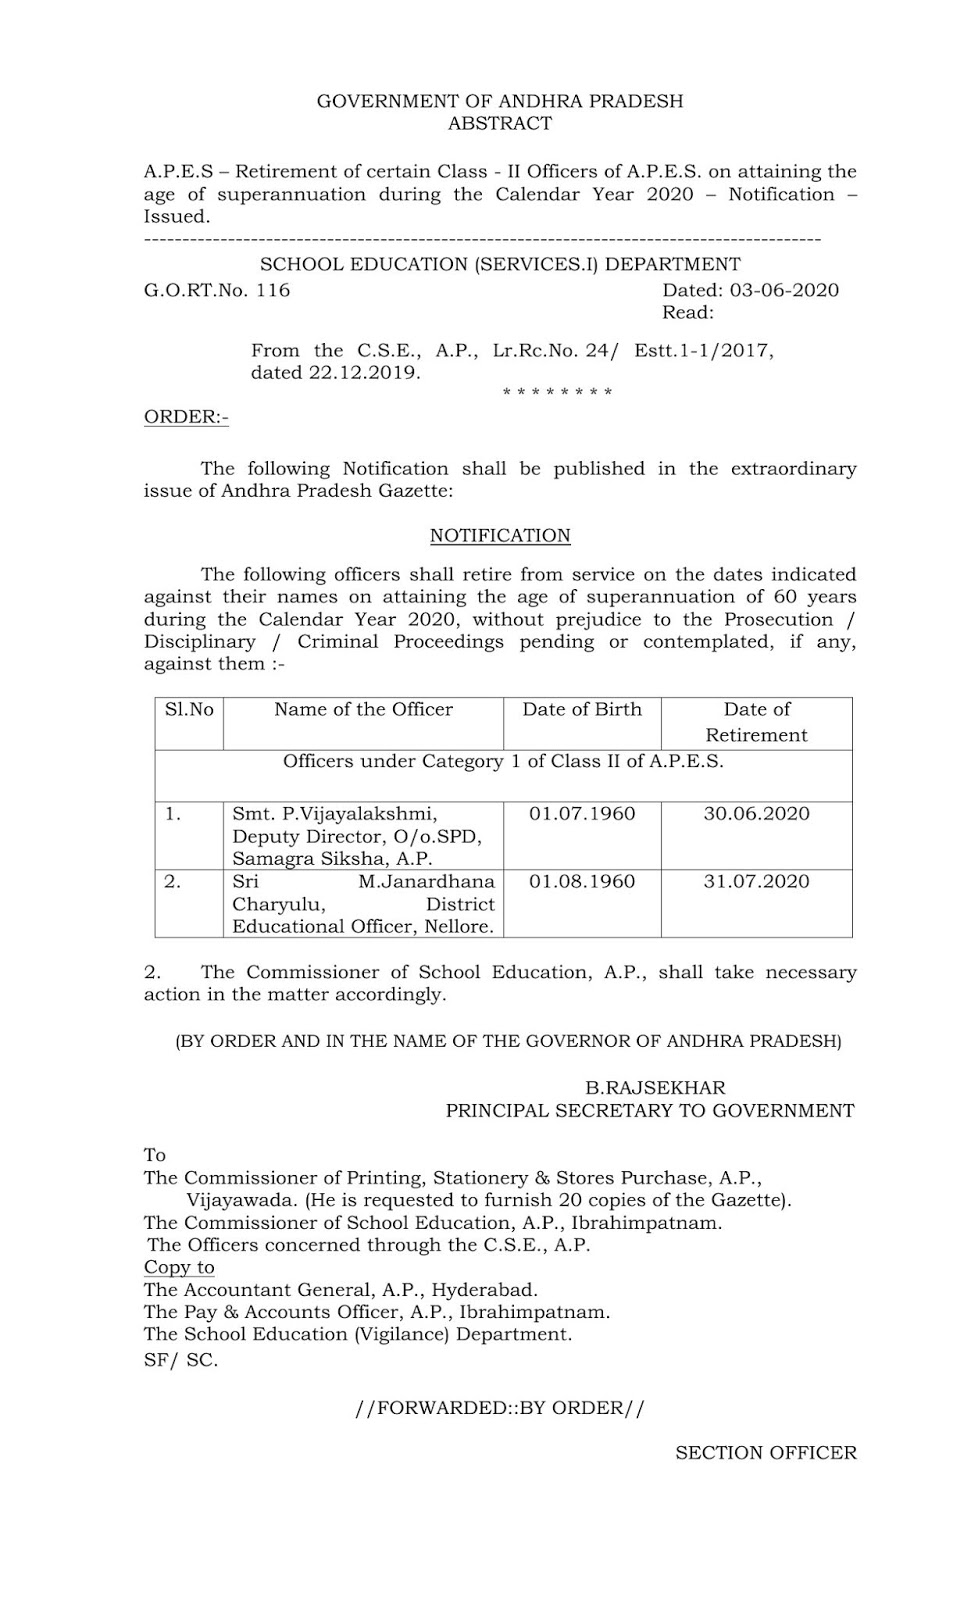 AP Go-Number.116 Retirement of certain Class-II Officers of A.P.E.S for School Education